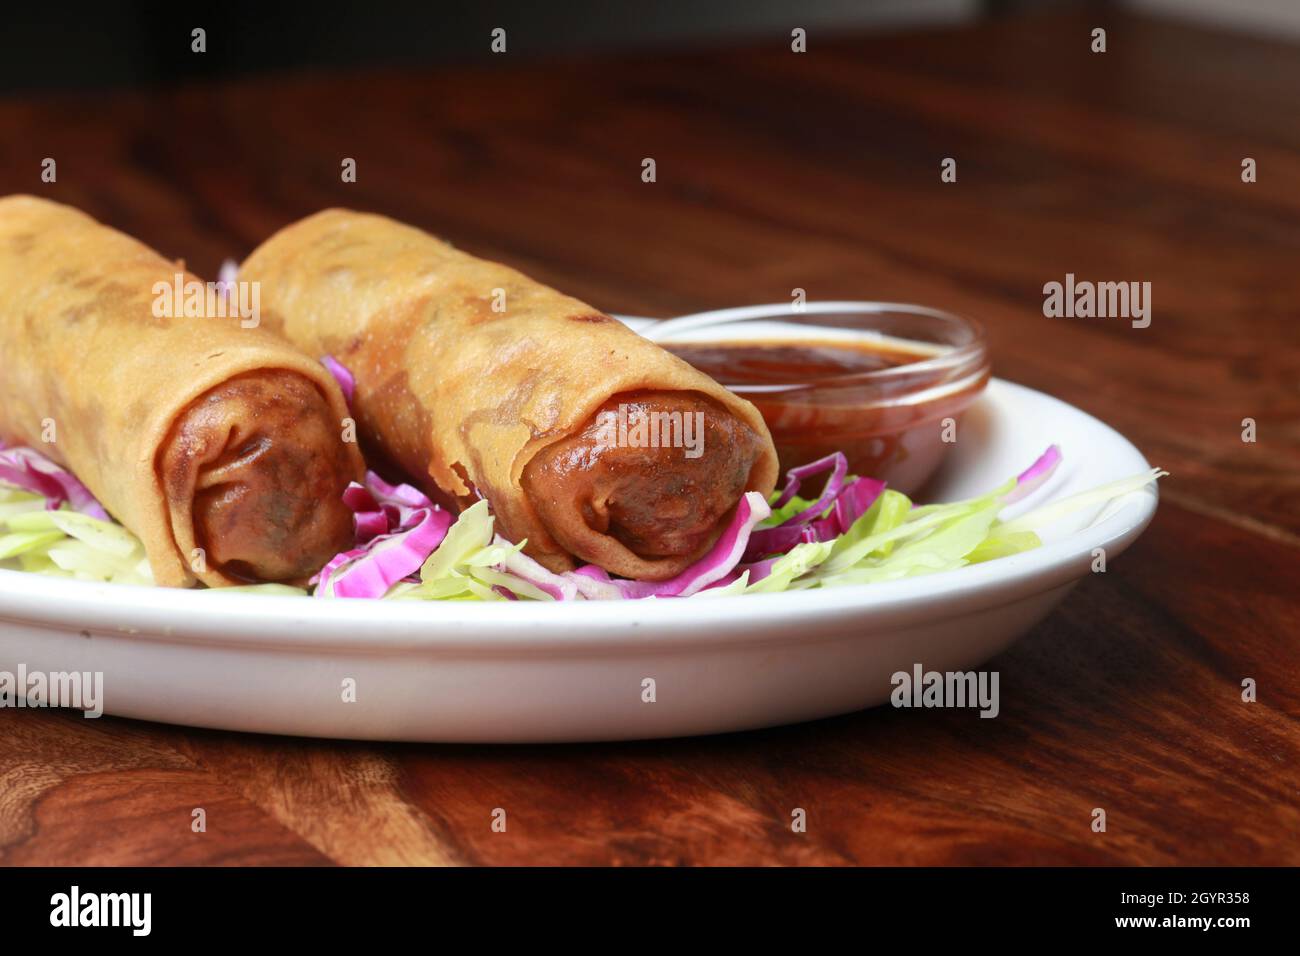 Two Egg rolls in a plate Stock Photo